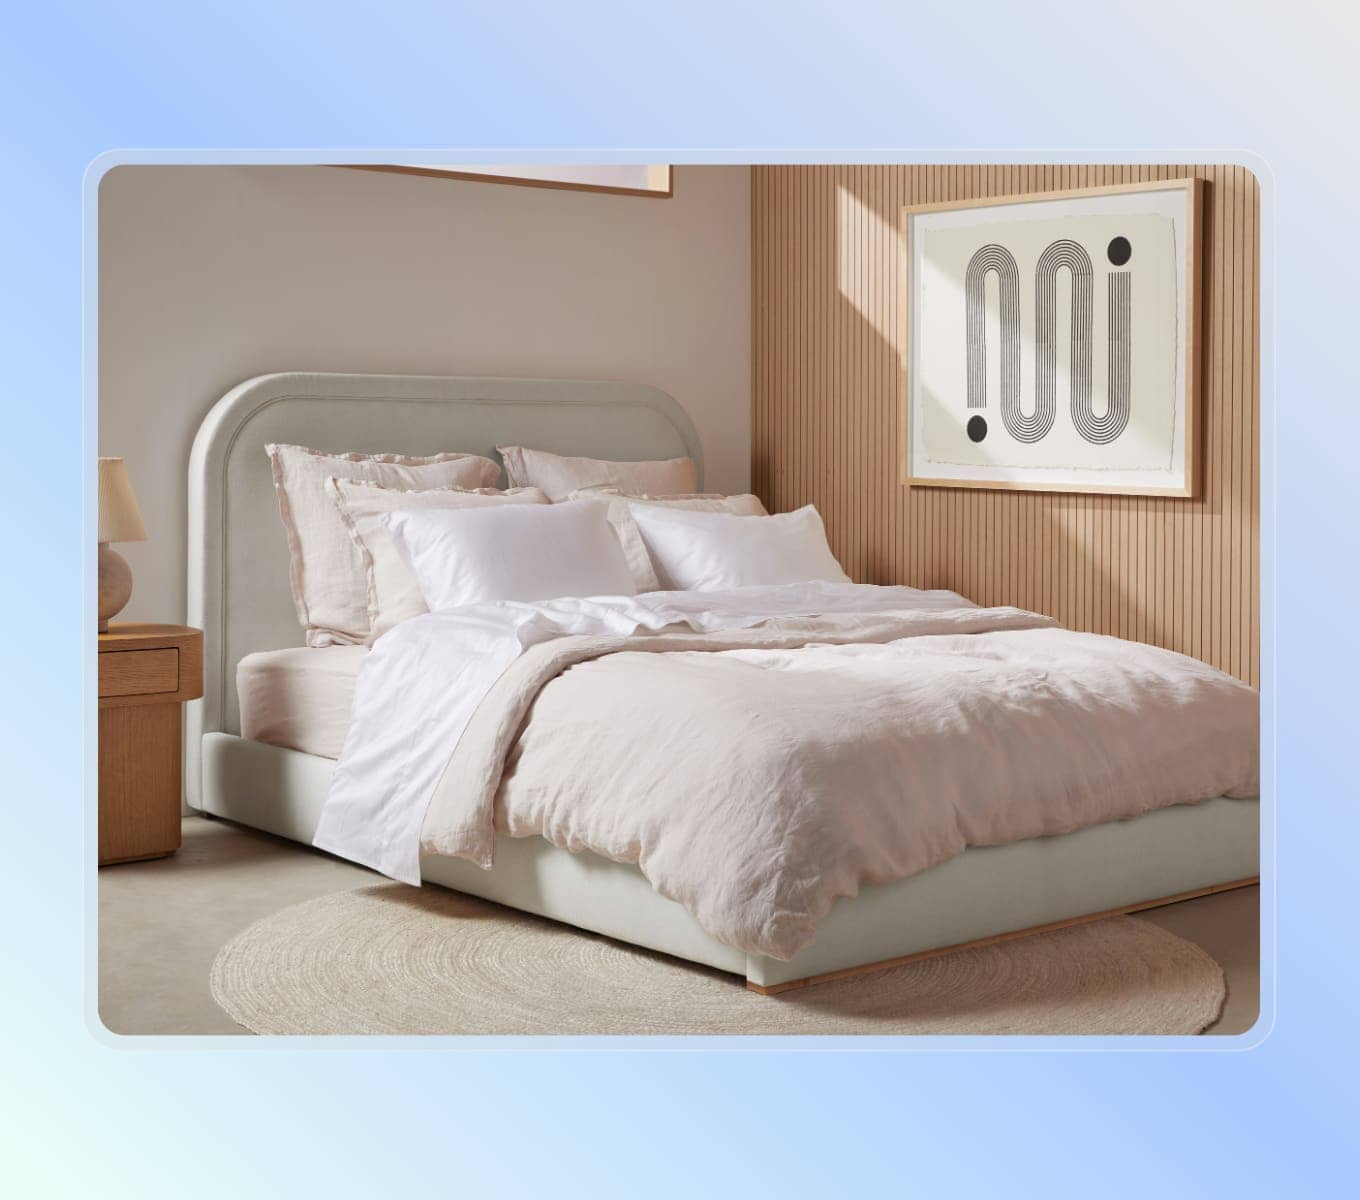 Parachute’s Horizon Bed Frame with headboard